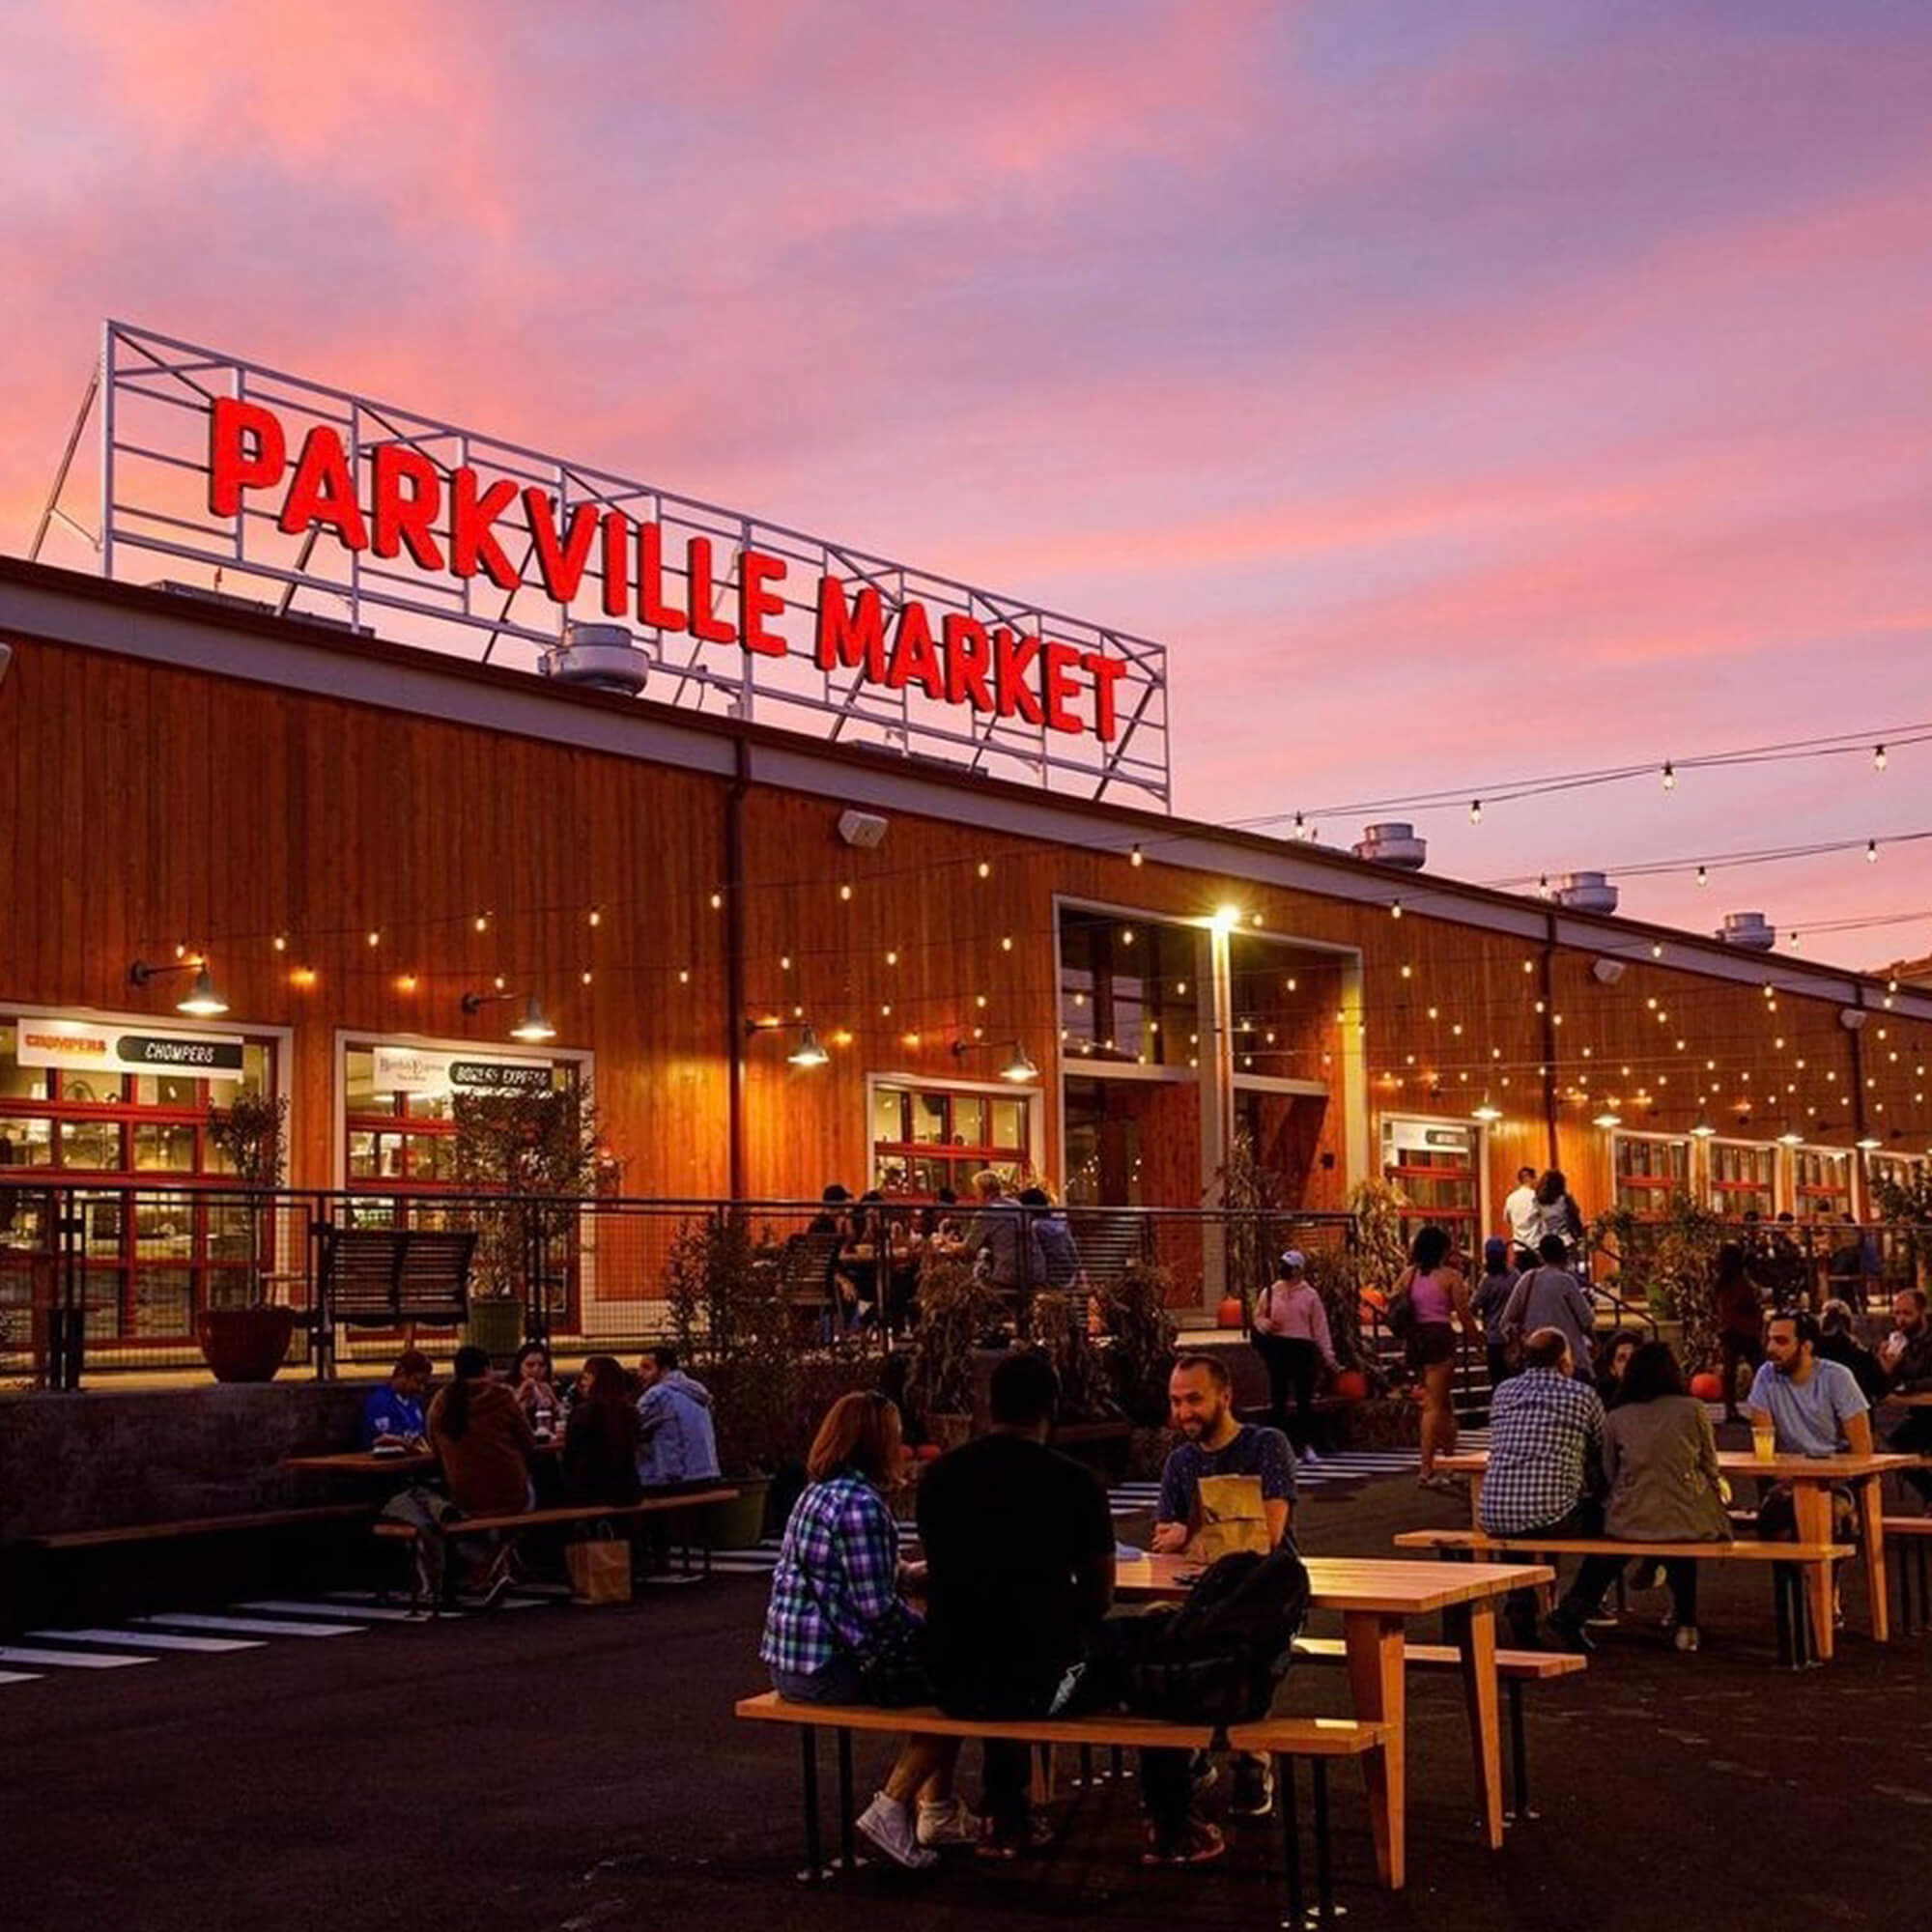 Parkville Market outdoor seating with a sunset.